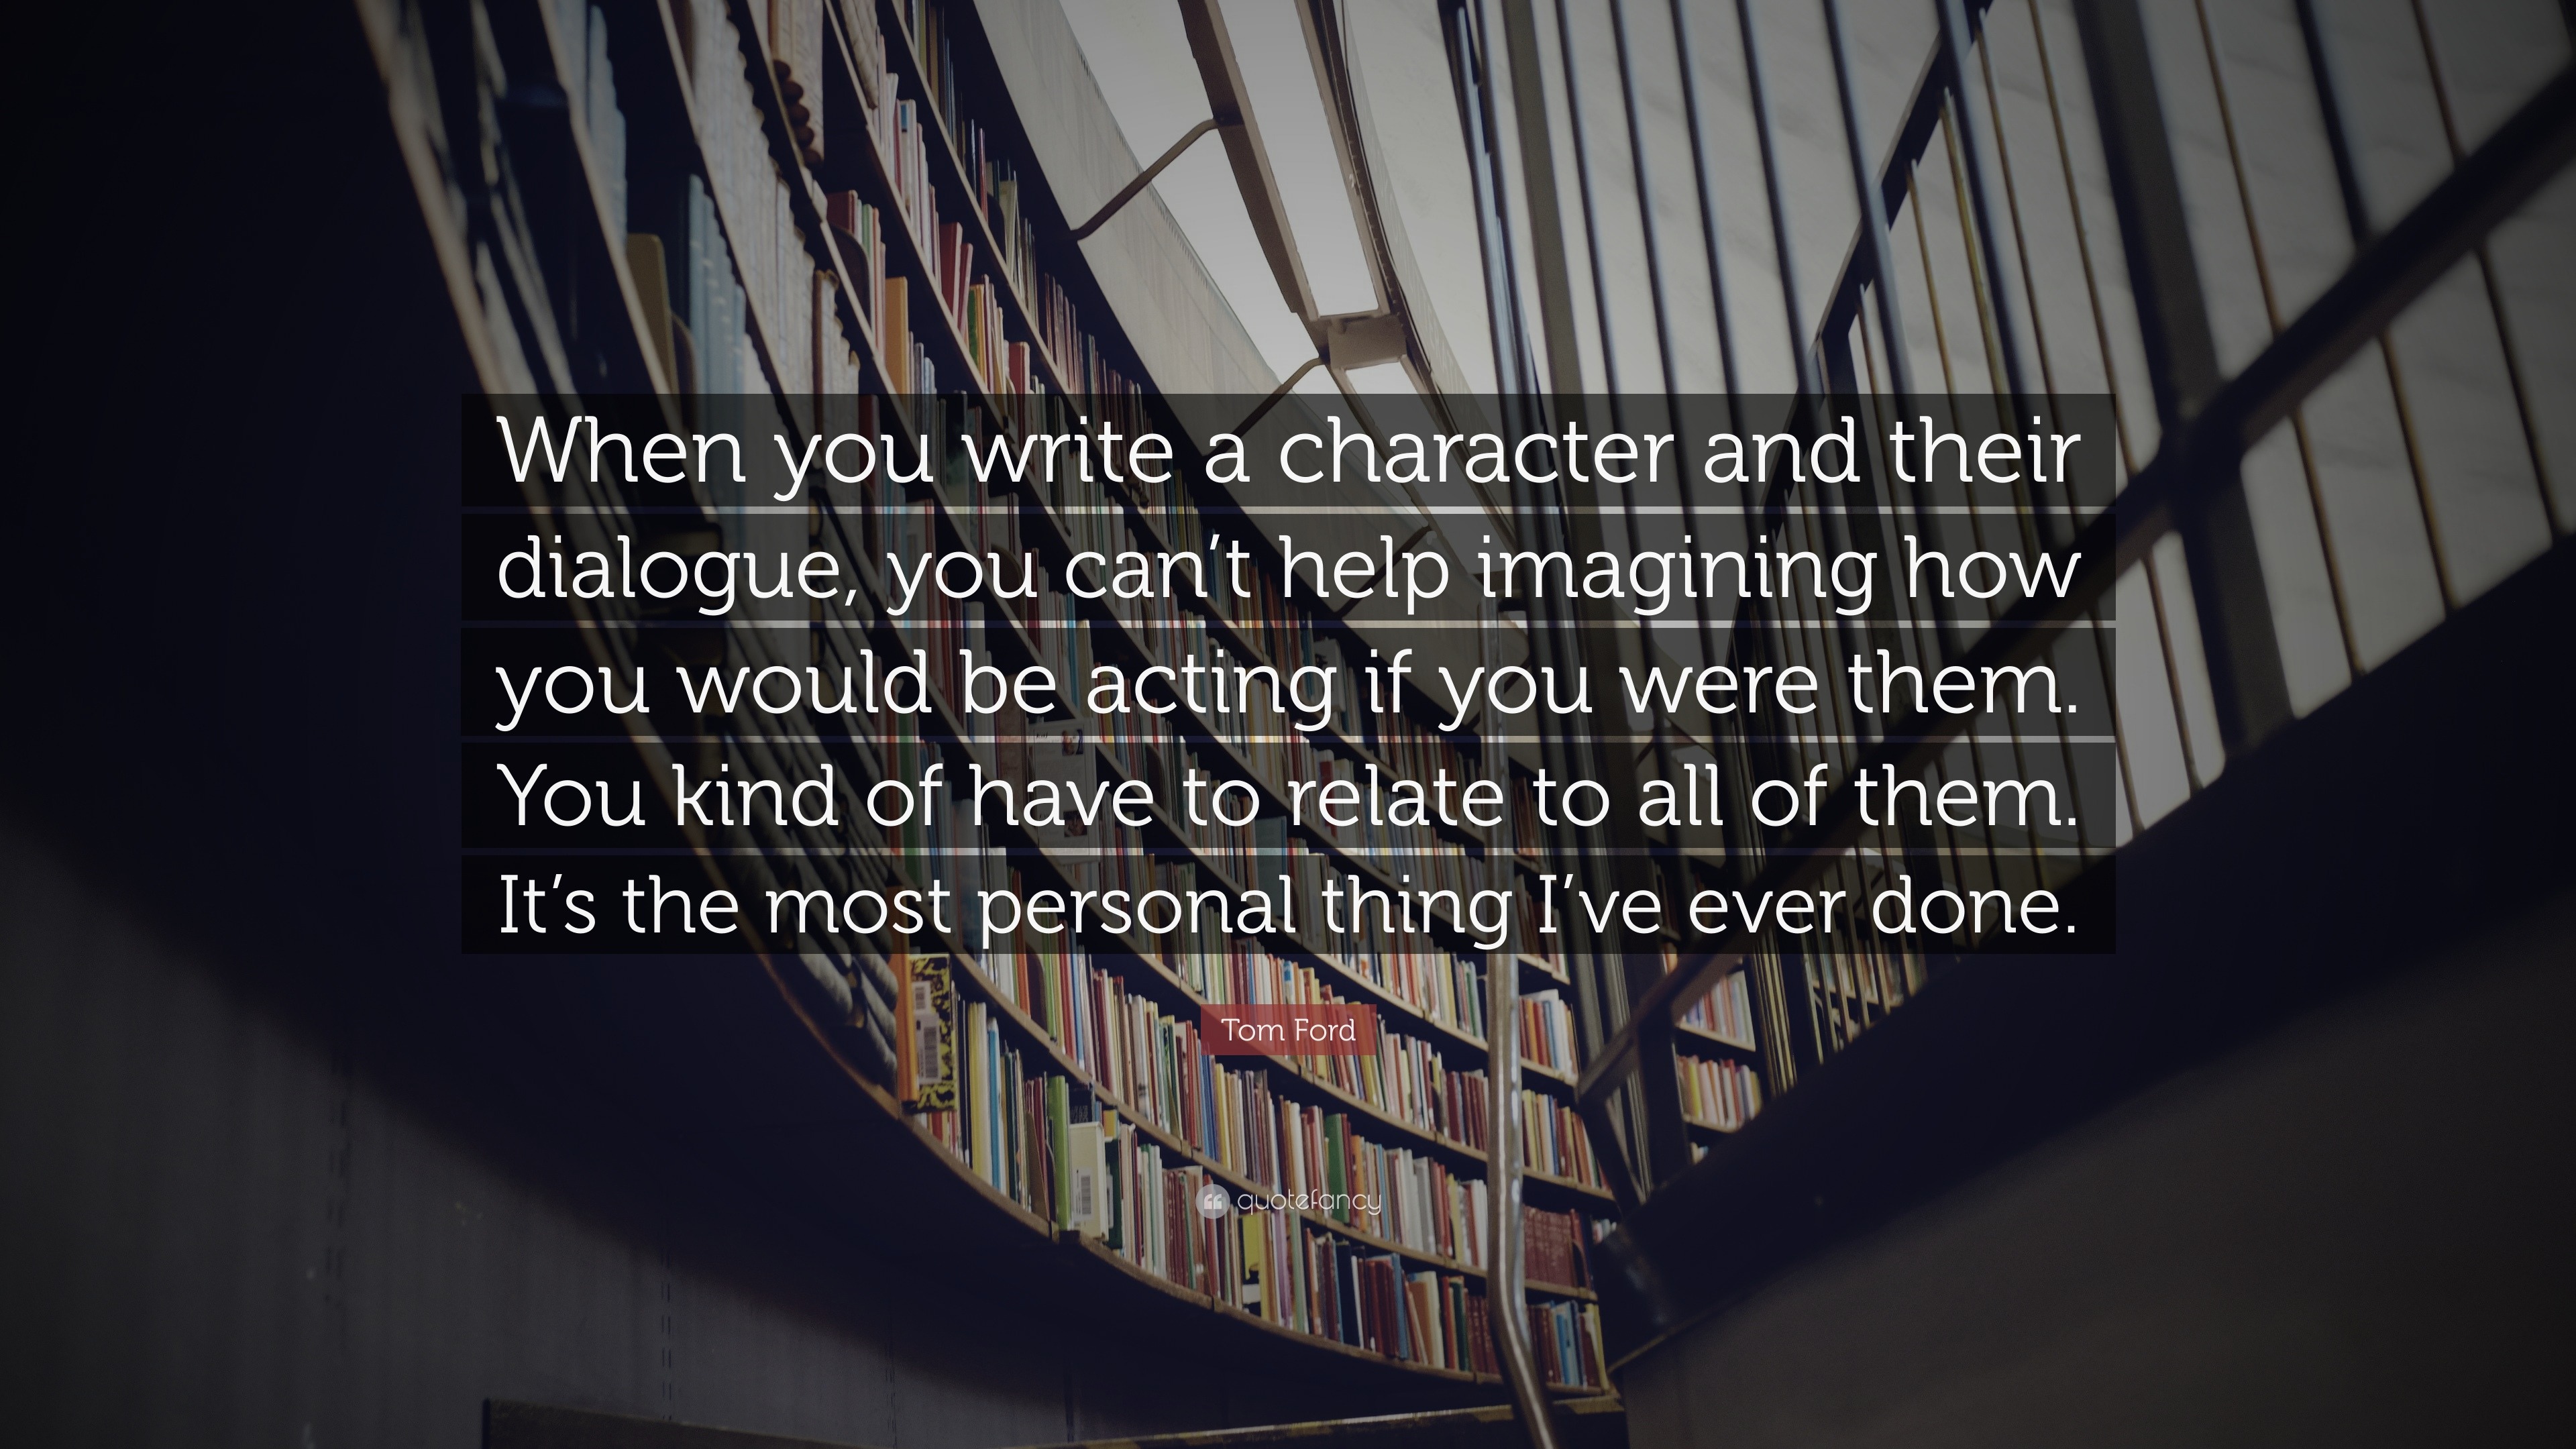 Tom Ford Quote: “When you write a character and their dialogue, you can't  help imagining how you would be acting if you were them. You ki...”